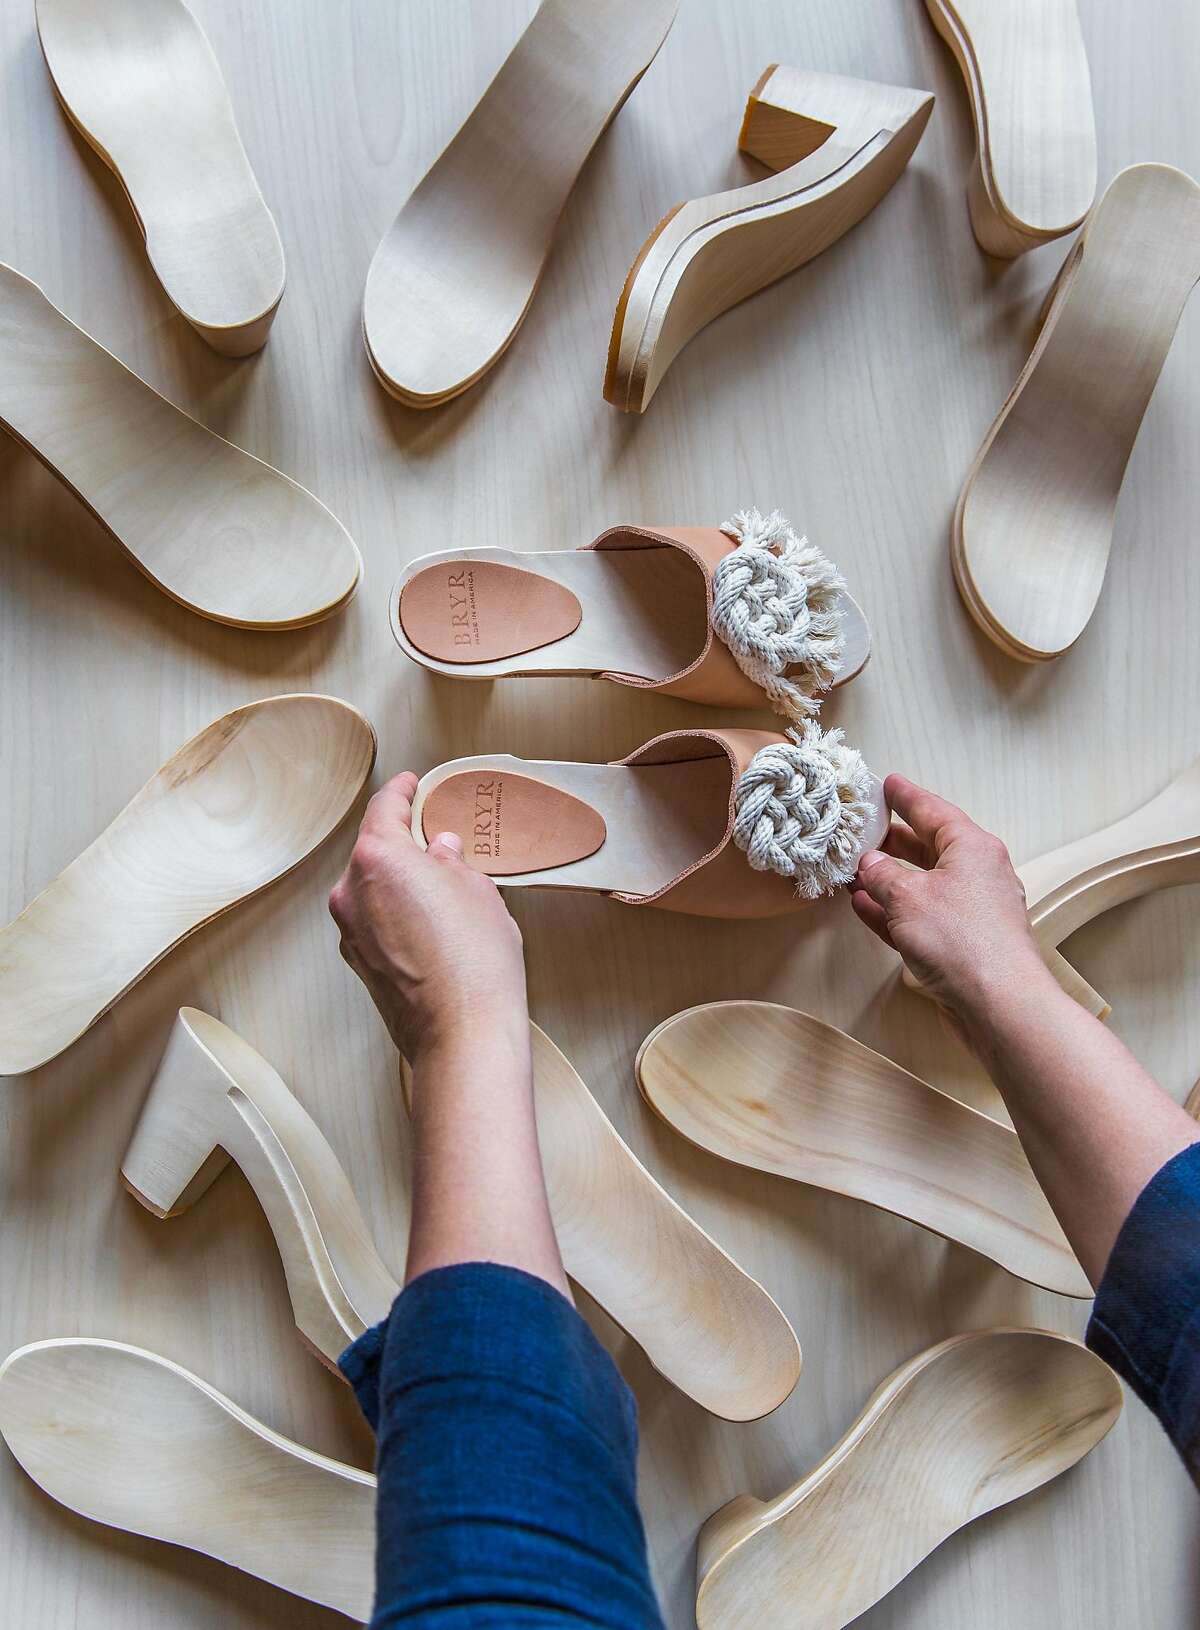 Clog company Bryr and artist Windy Chien have collaborated on this new style showing her knot art.